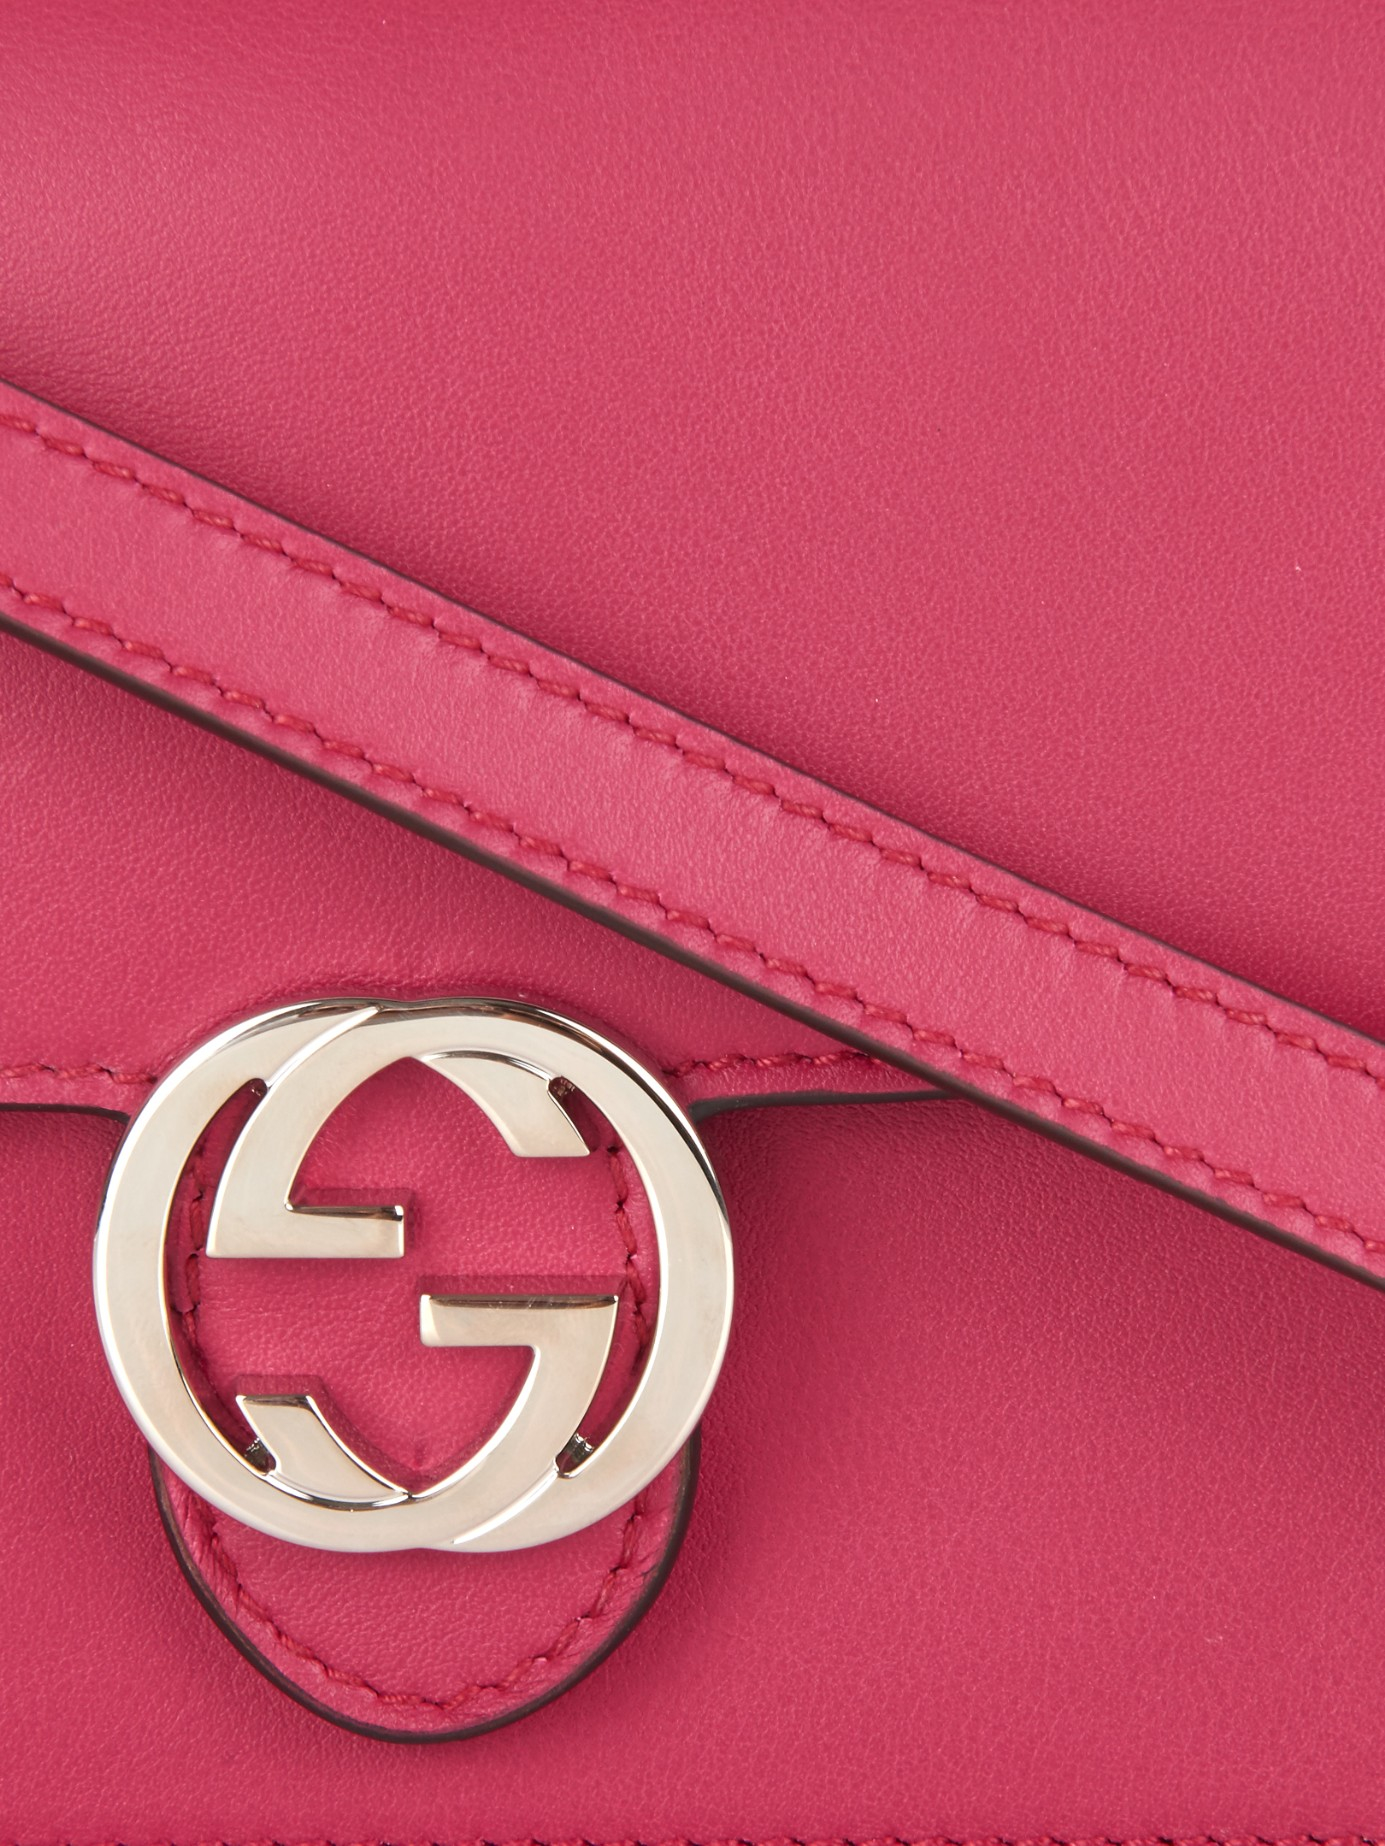 Gucci Icon Leather Strap Wallet in Pink - Lyst